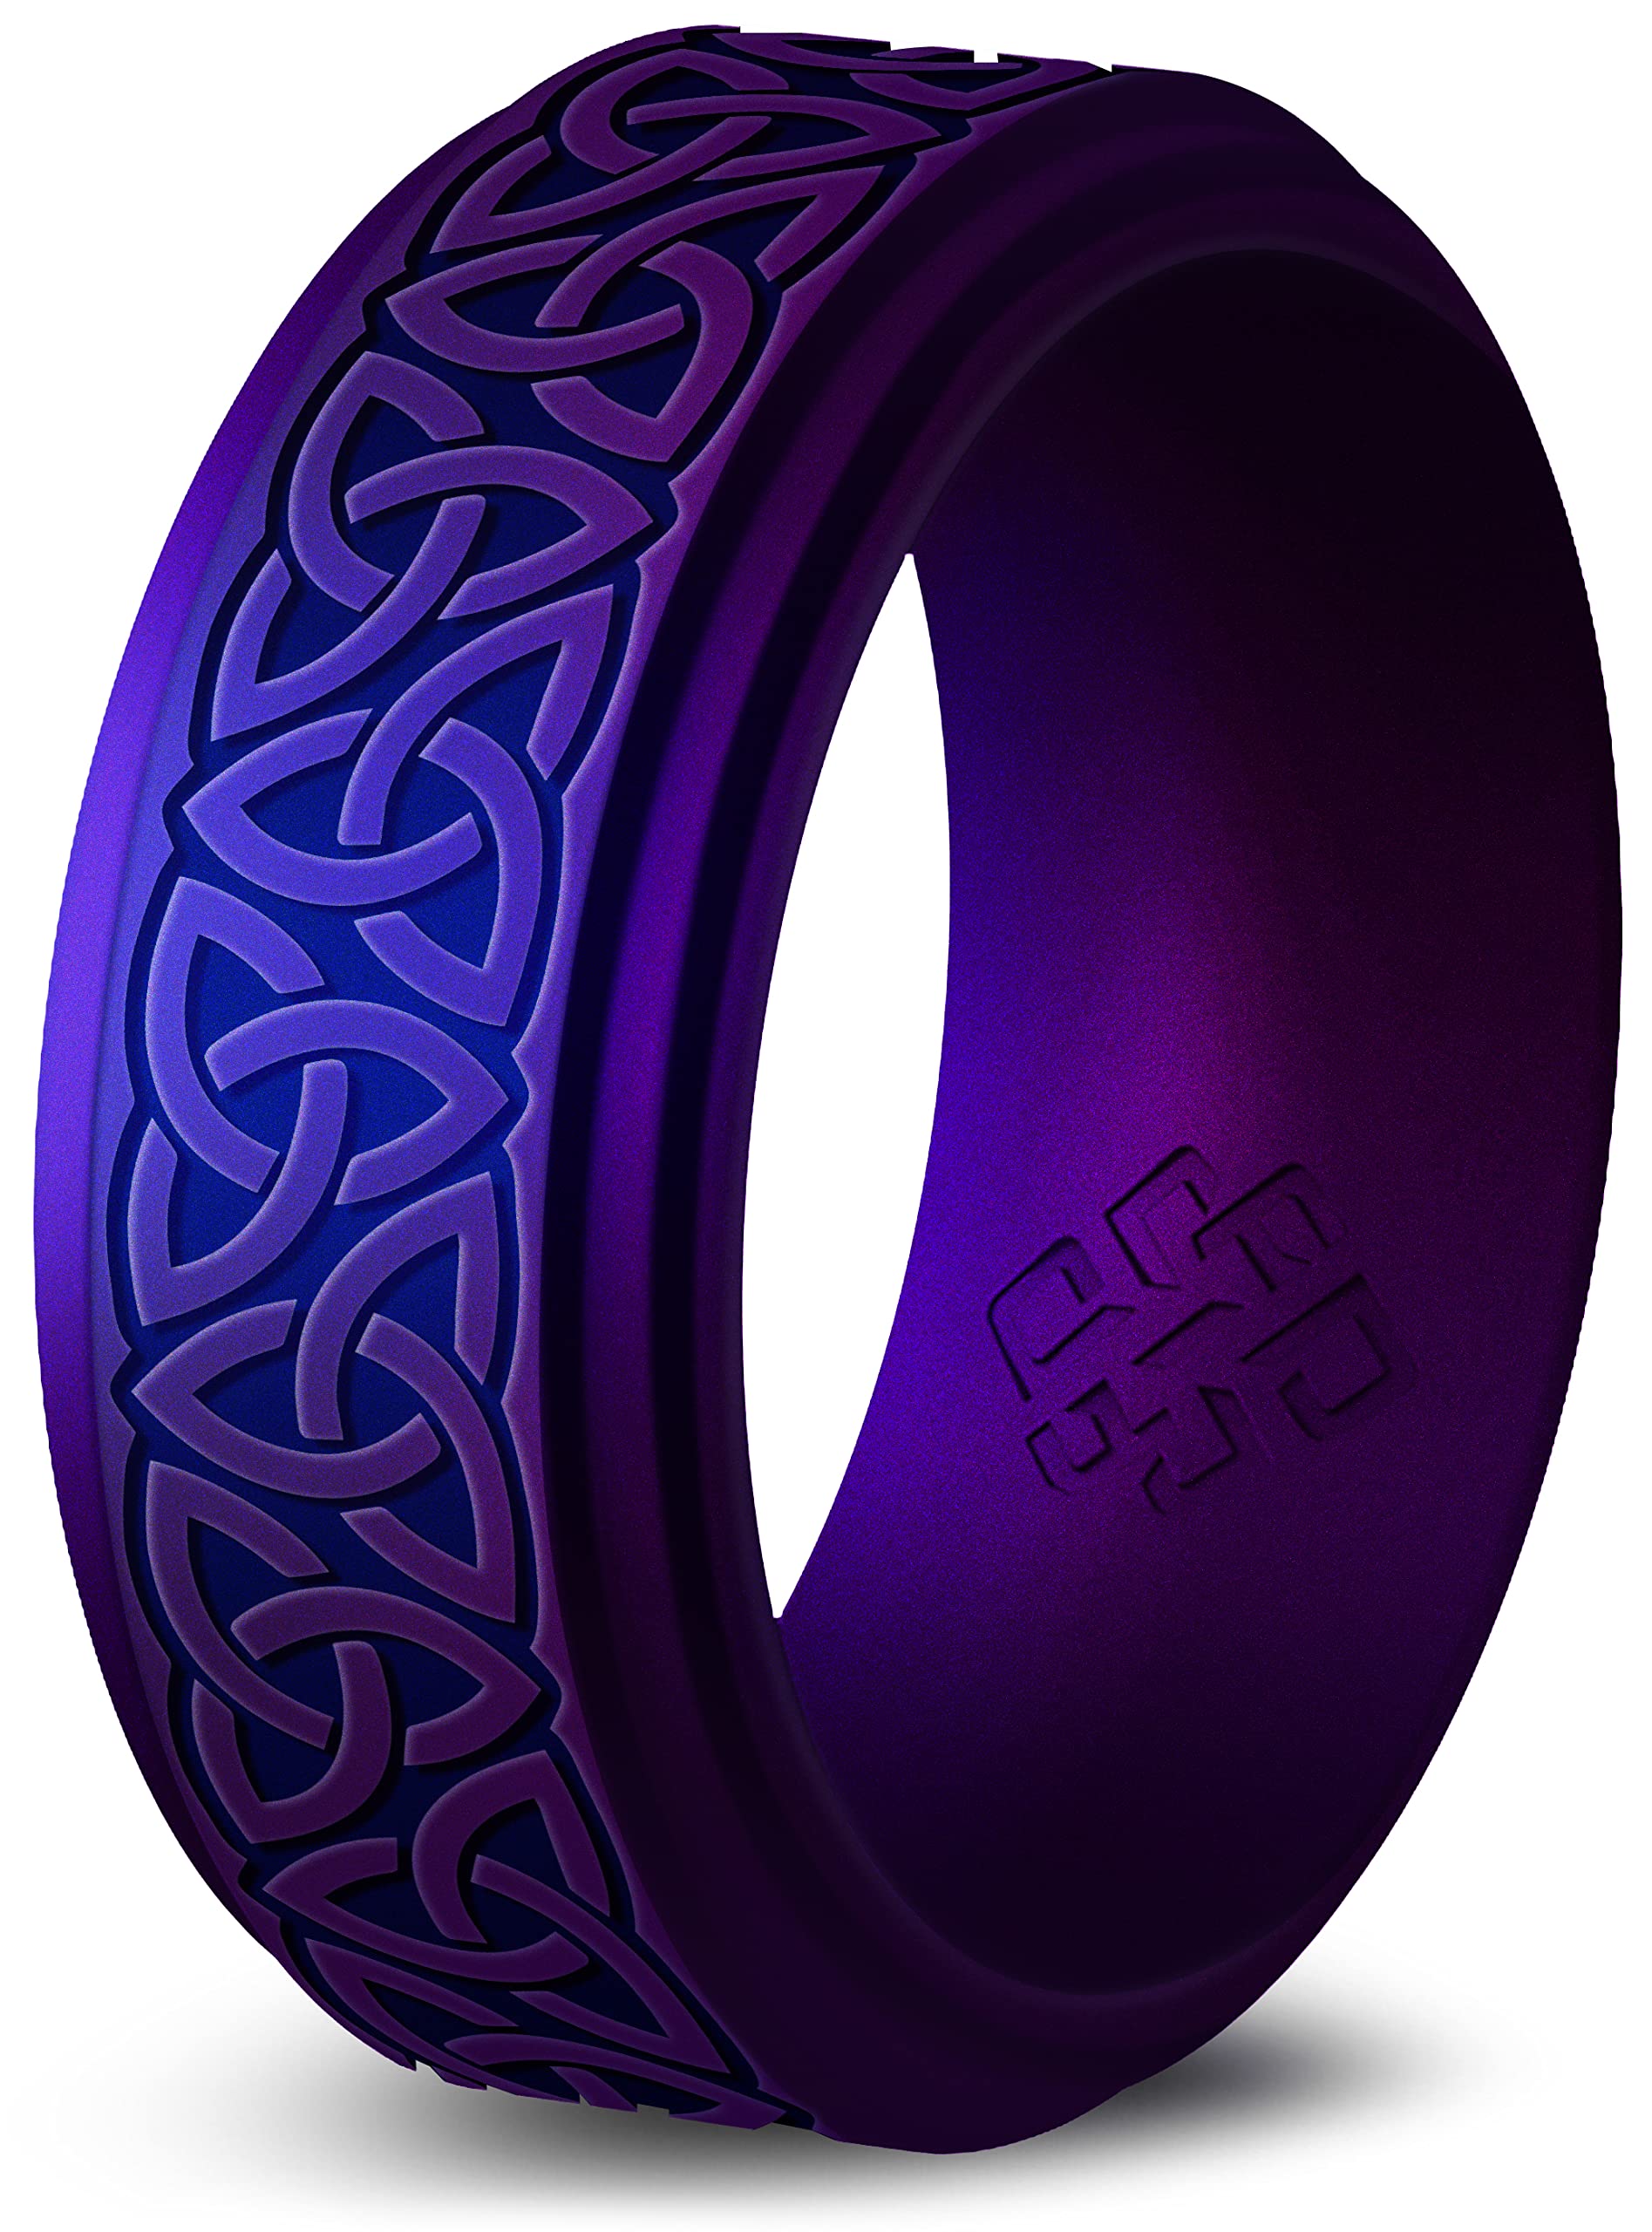 Knot Theory Silicone Ring for Men - Trinity, Claddagh, Celtic Engraving - 8mm Bandwidth Breathable Comfort Fit